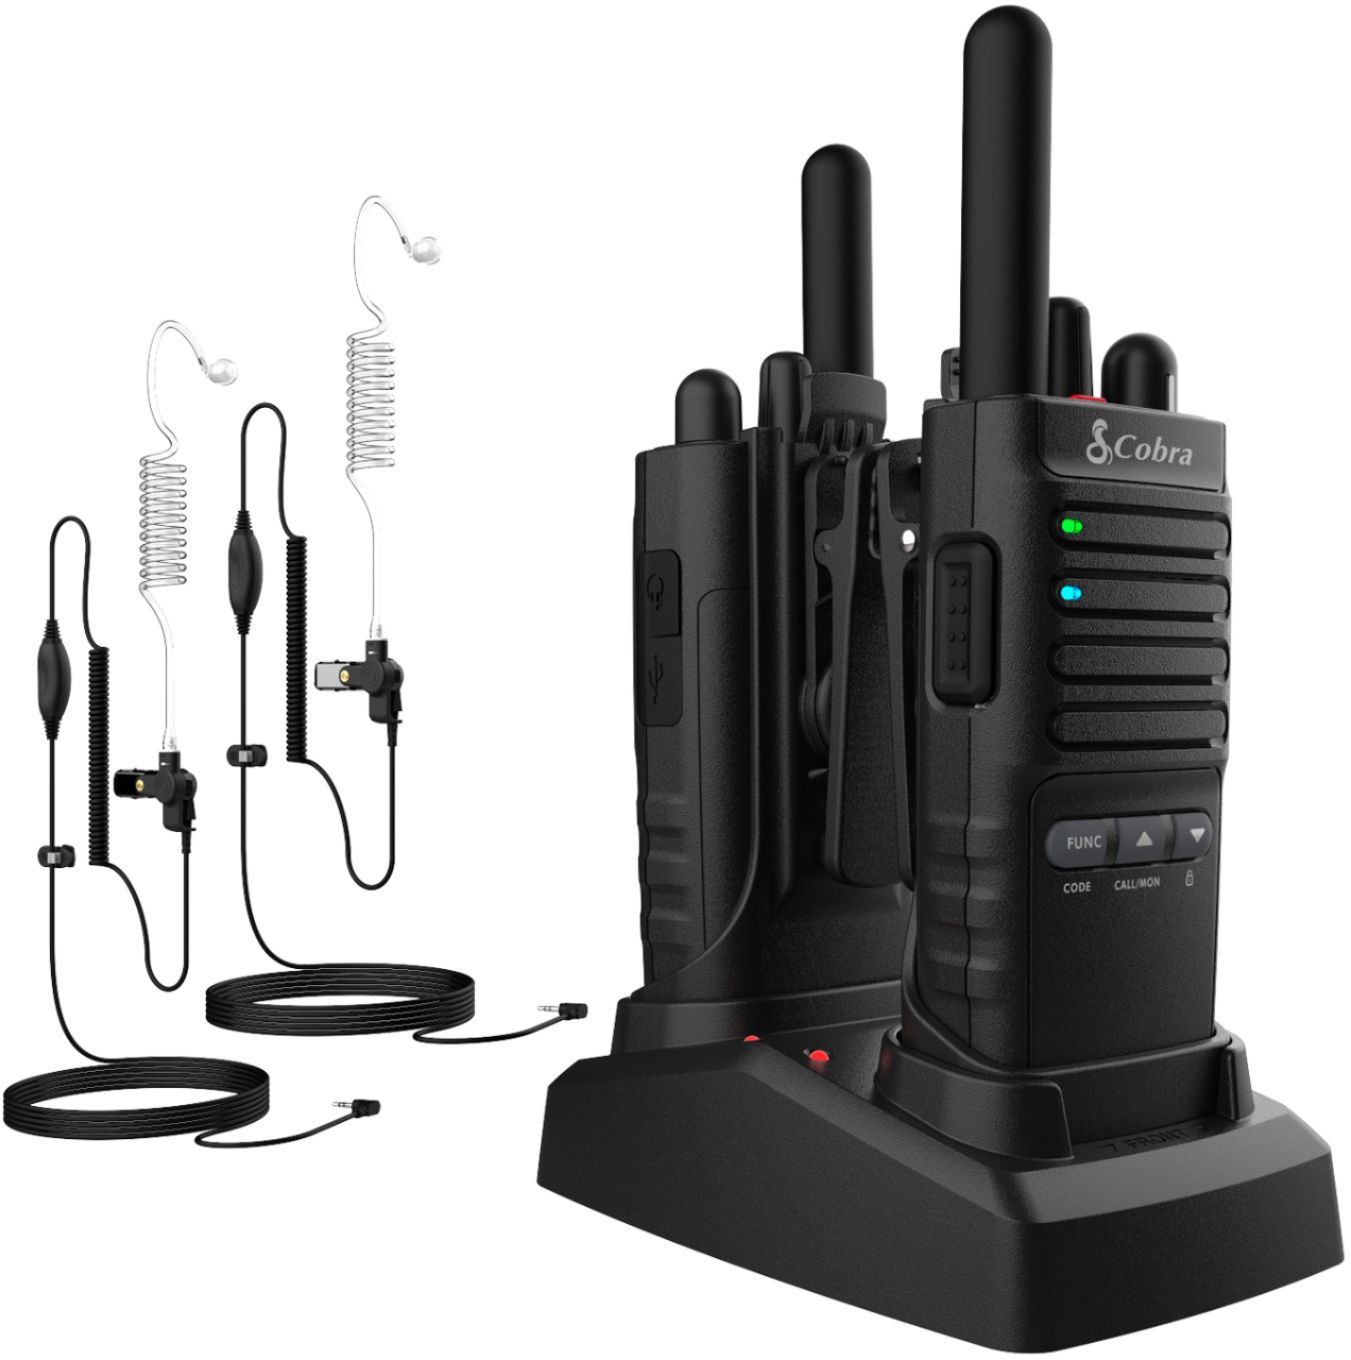 Angle View: Cobra - Pro Business 42-Mile, 22-Channel FRS 2-Way Radios with Surveillance Headsets (Pair) - Black